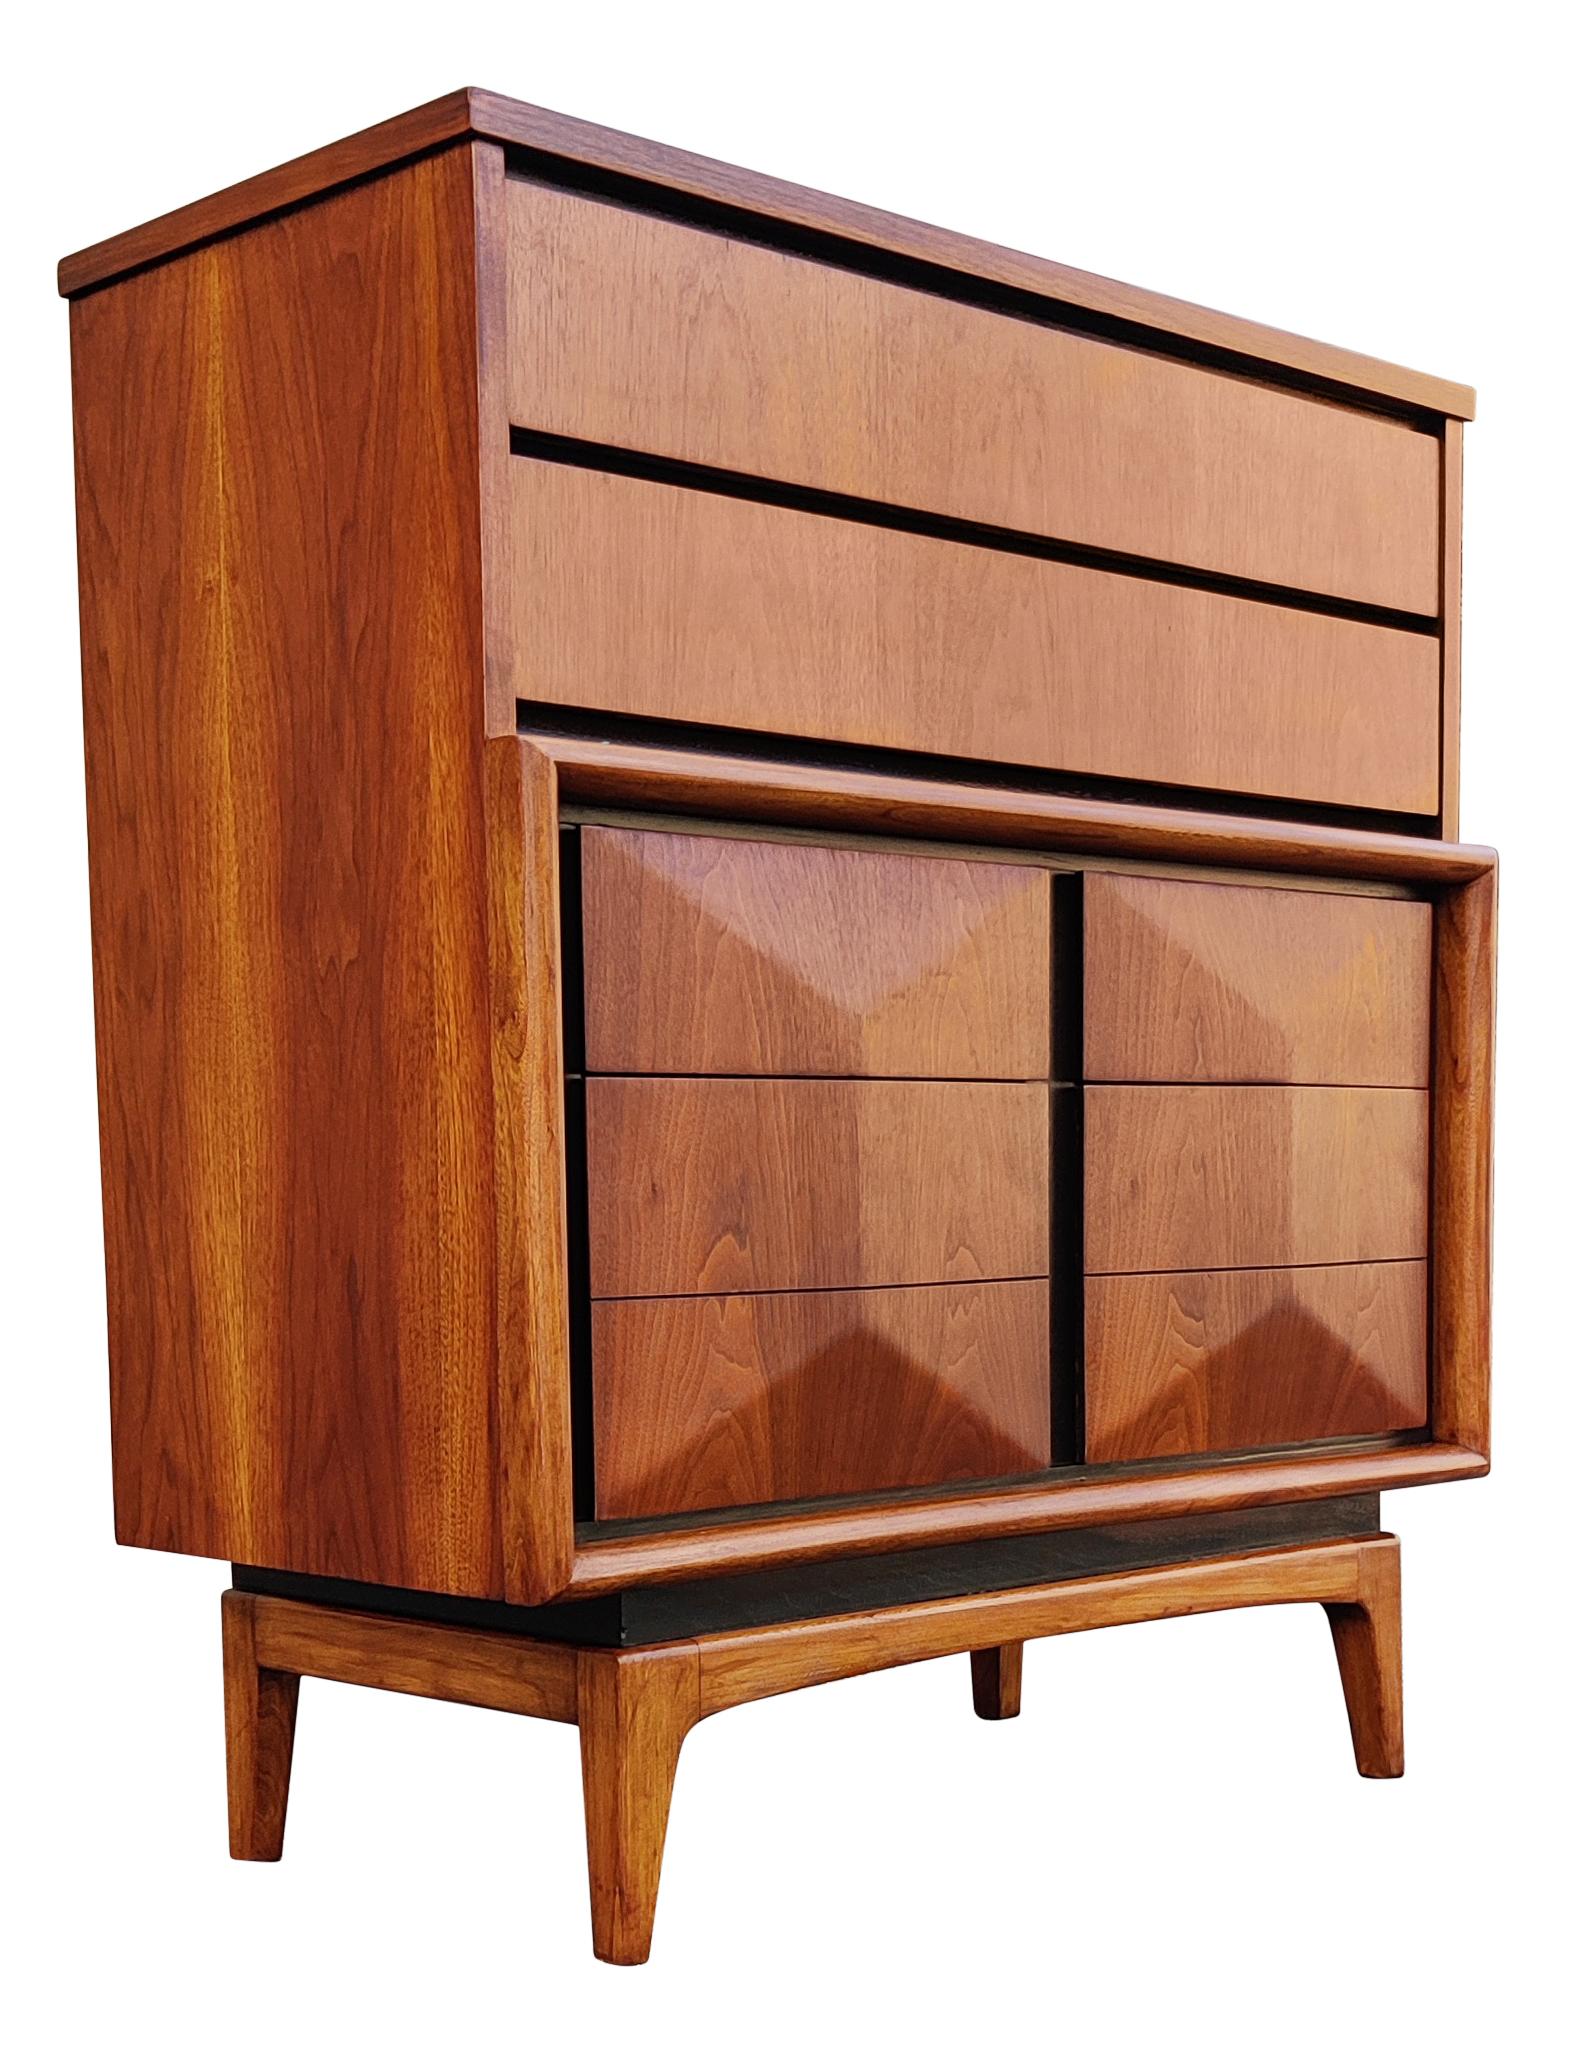 Please note: I have the entire bedroom set at this time. Triple dresser. Tall dresser. Pair nightstands. See last picture!

Description: Mid-Century Modern United Furniture Company vintage circa 1950s tall dresser. A fine example of American retro